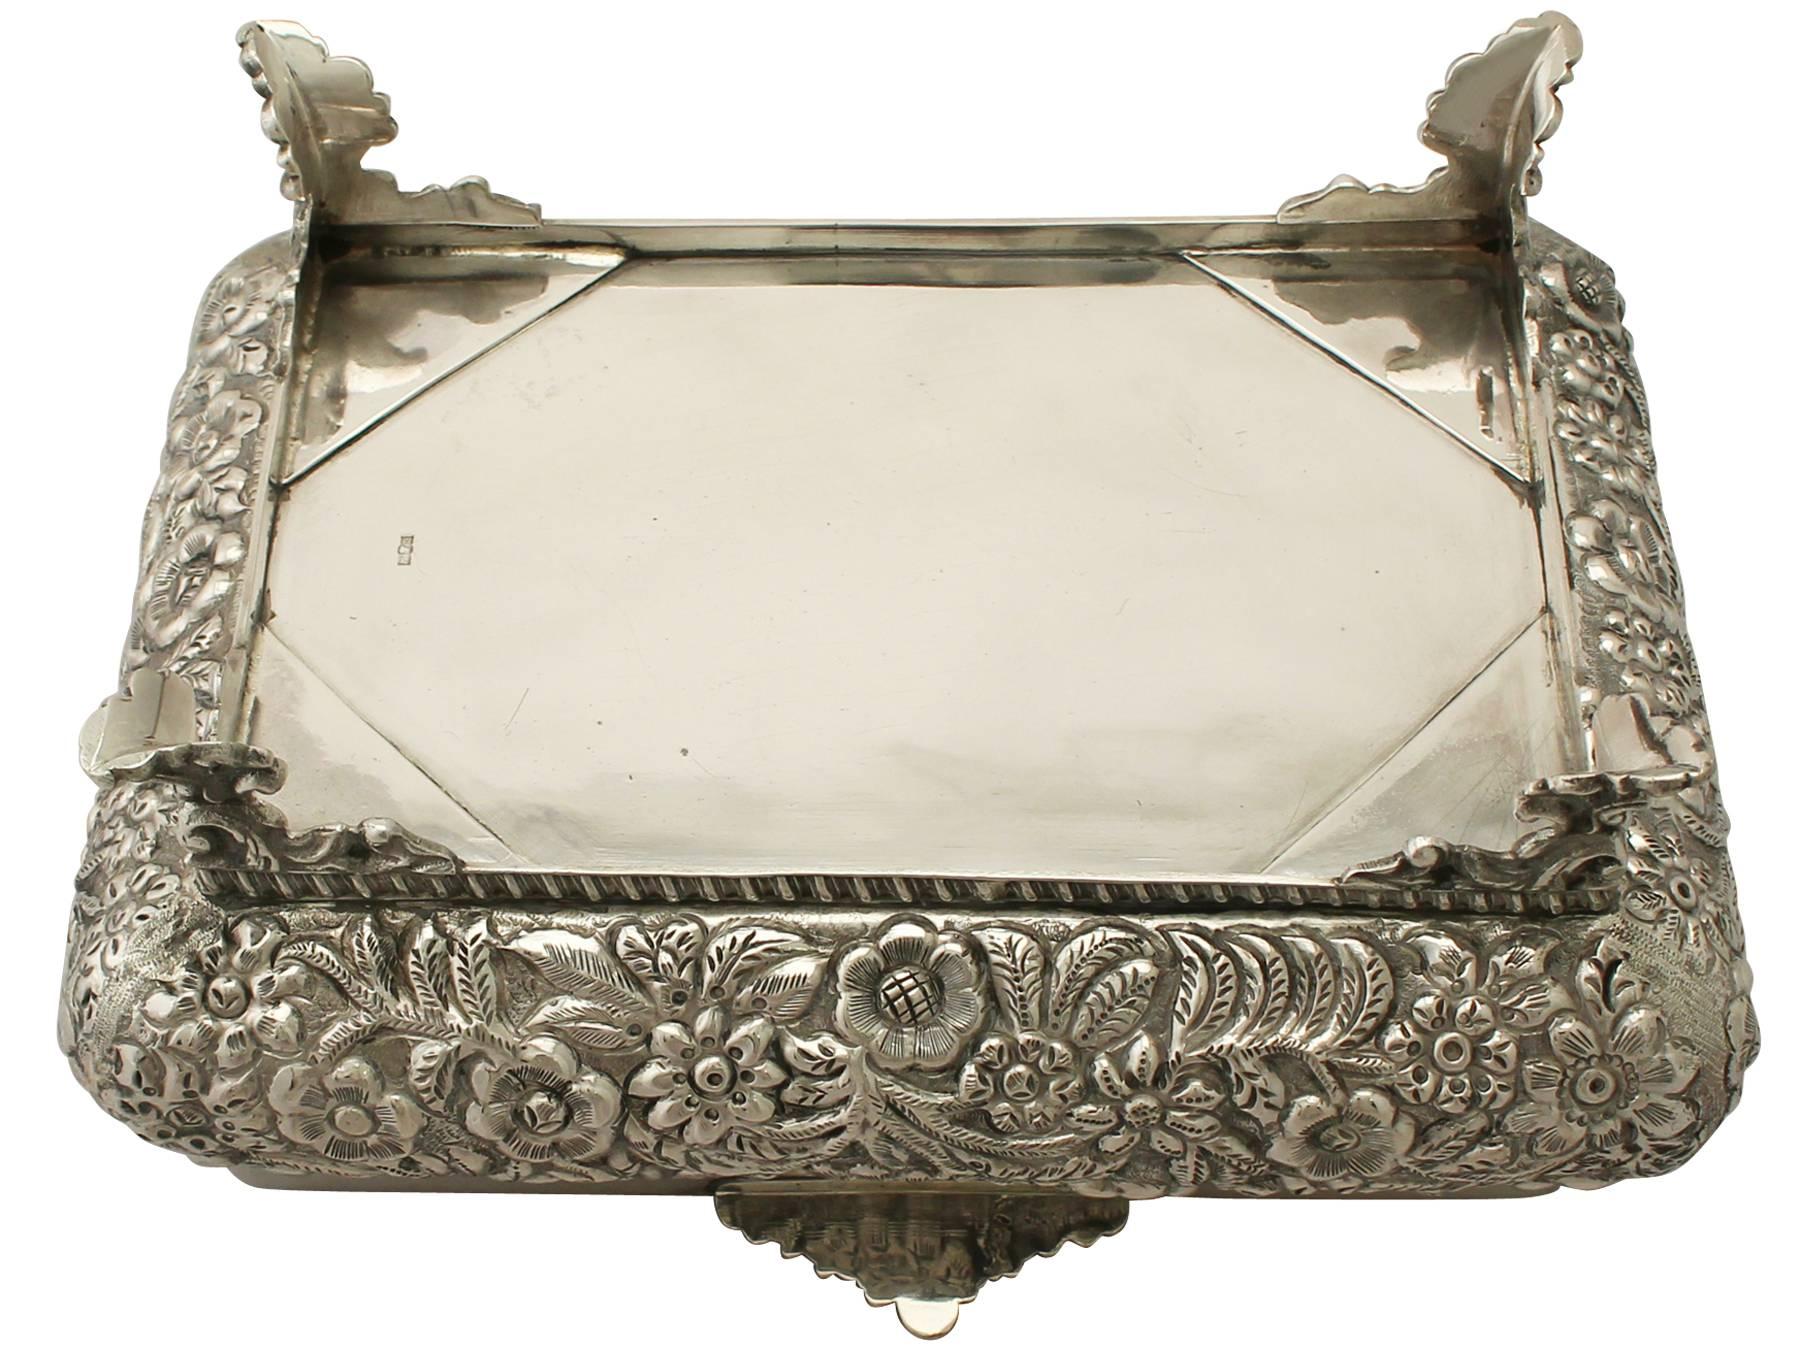 Vintage Egyptian Silver Jewelry Casket, Antique Style 4